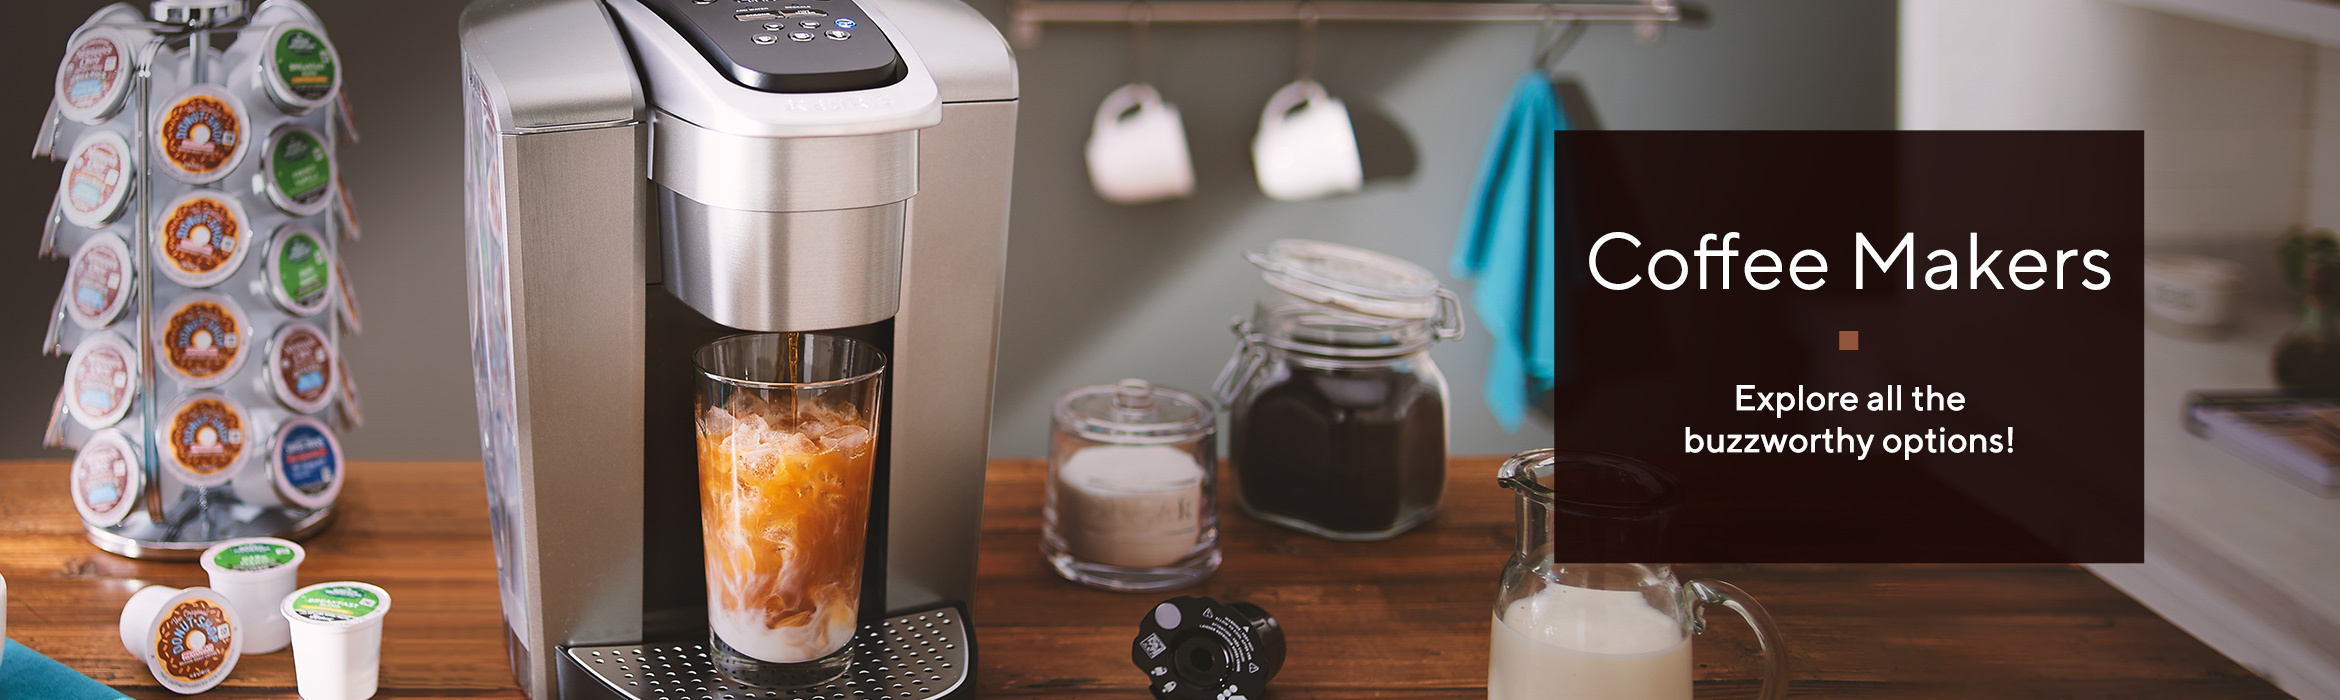 Coffee Makers  Explore all the buzzworthy options!